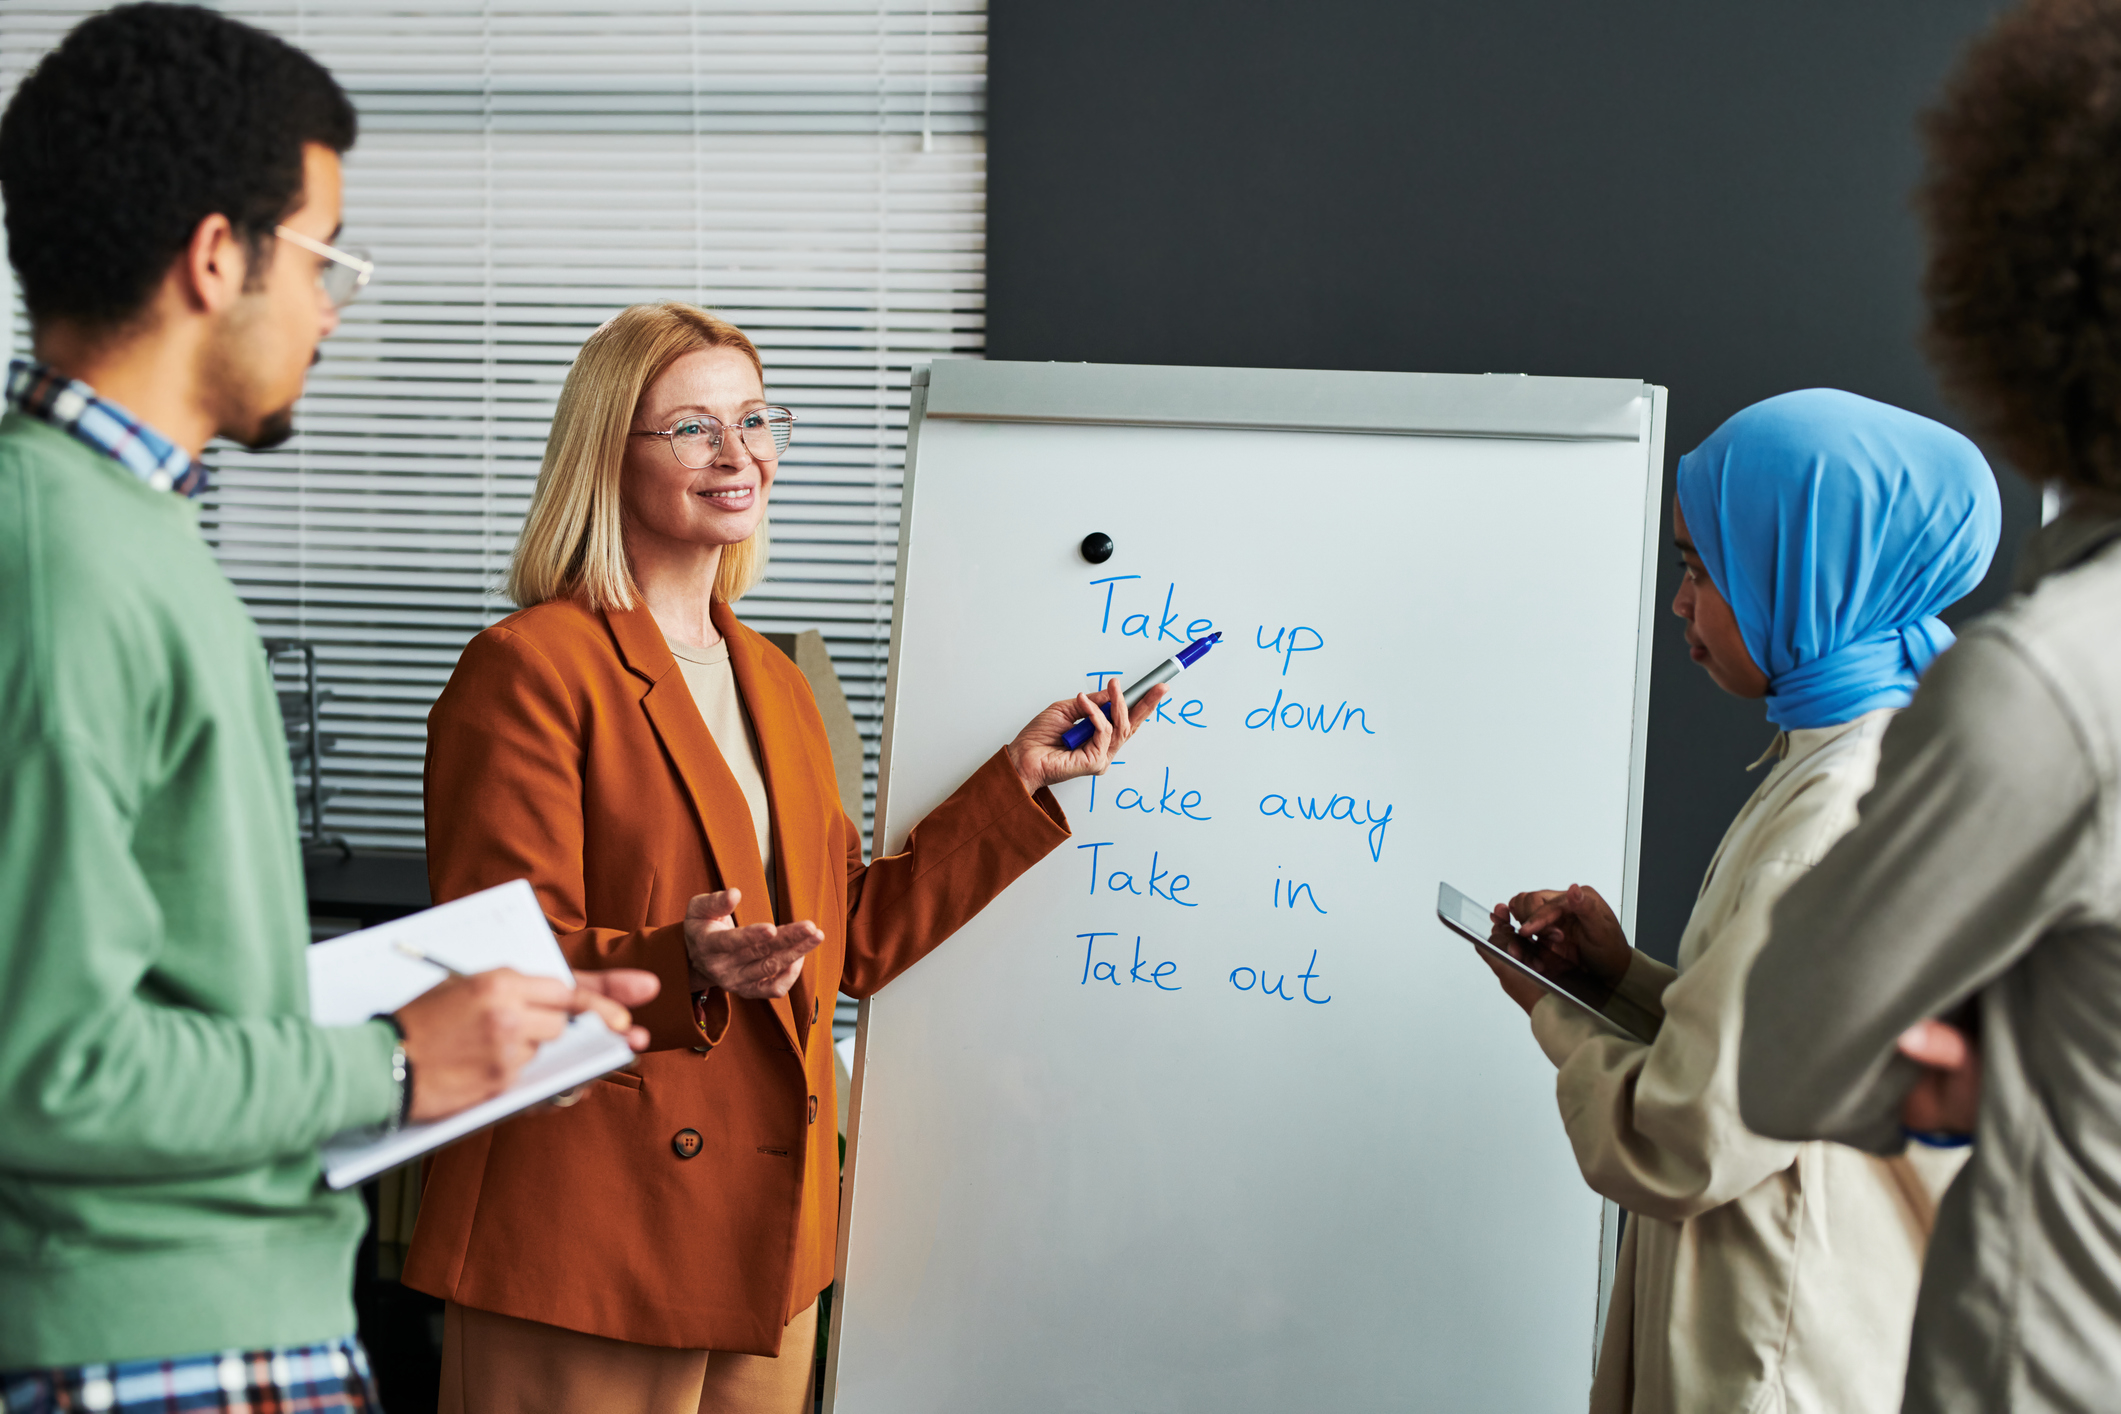 Woman presents on whiteboard to colleagues, in a classroom setting